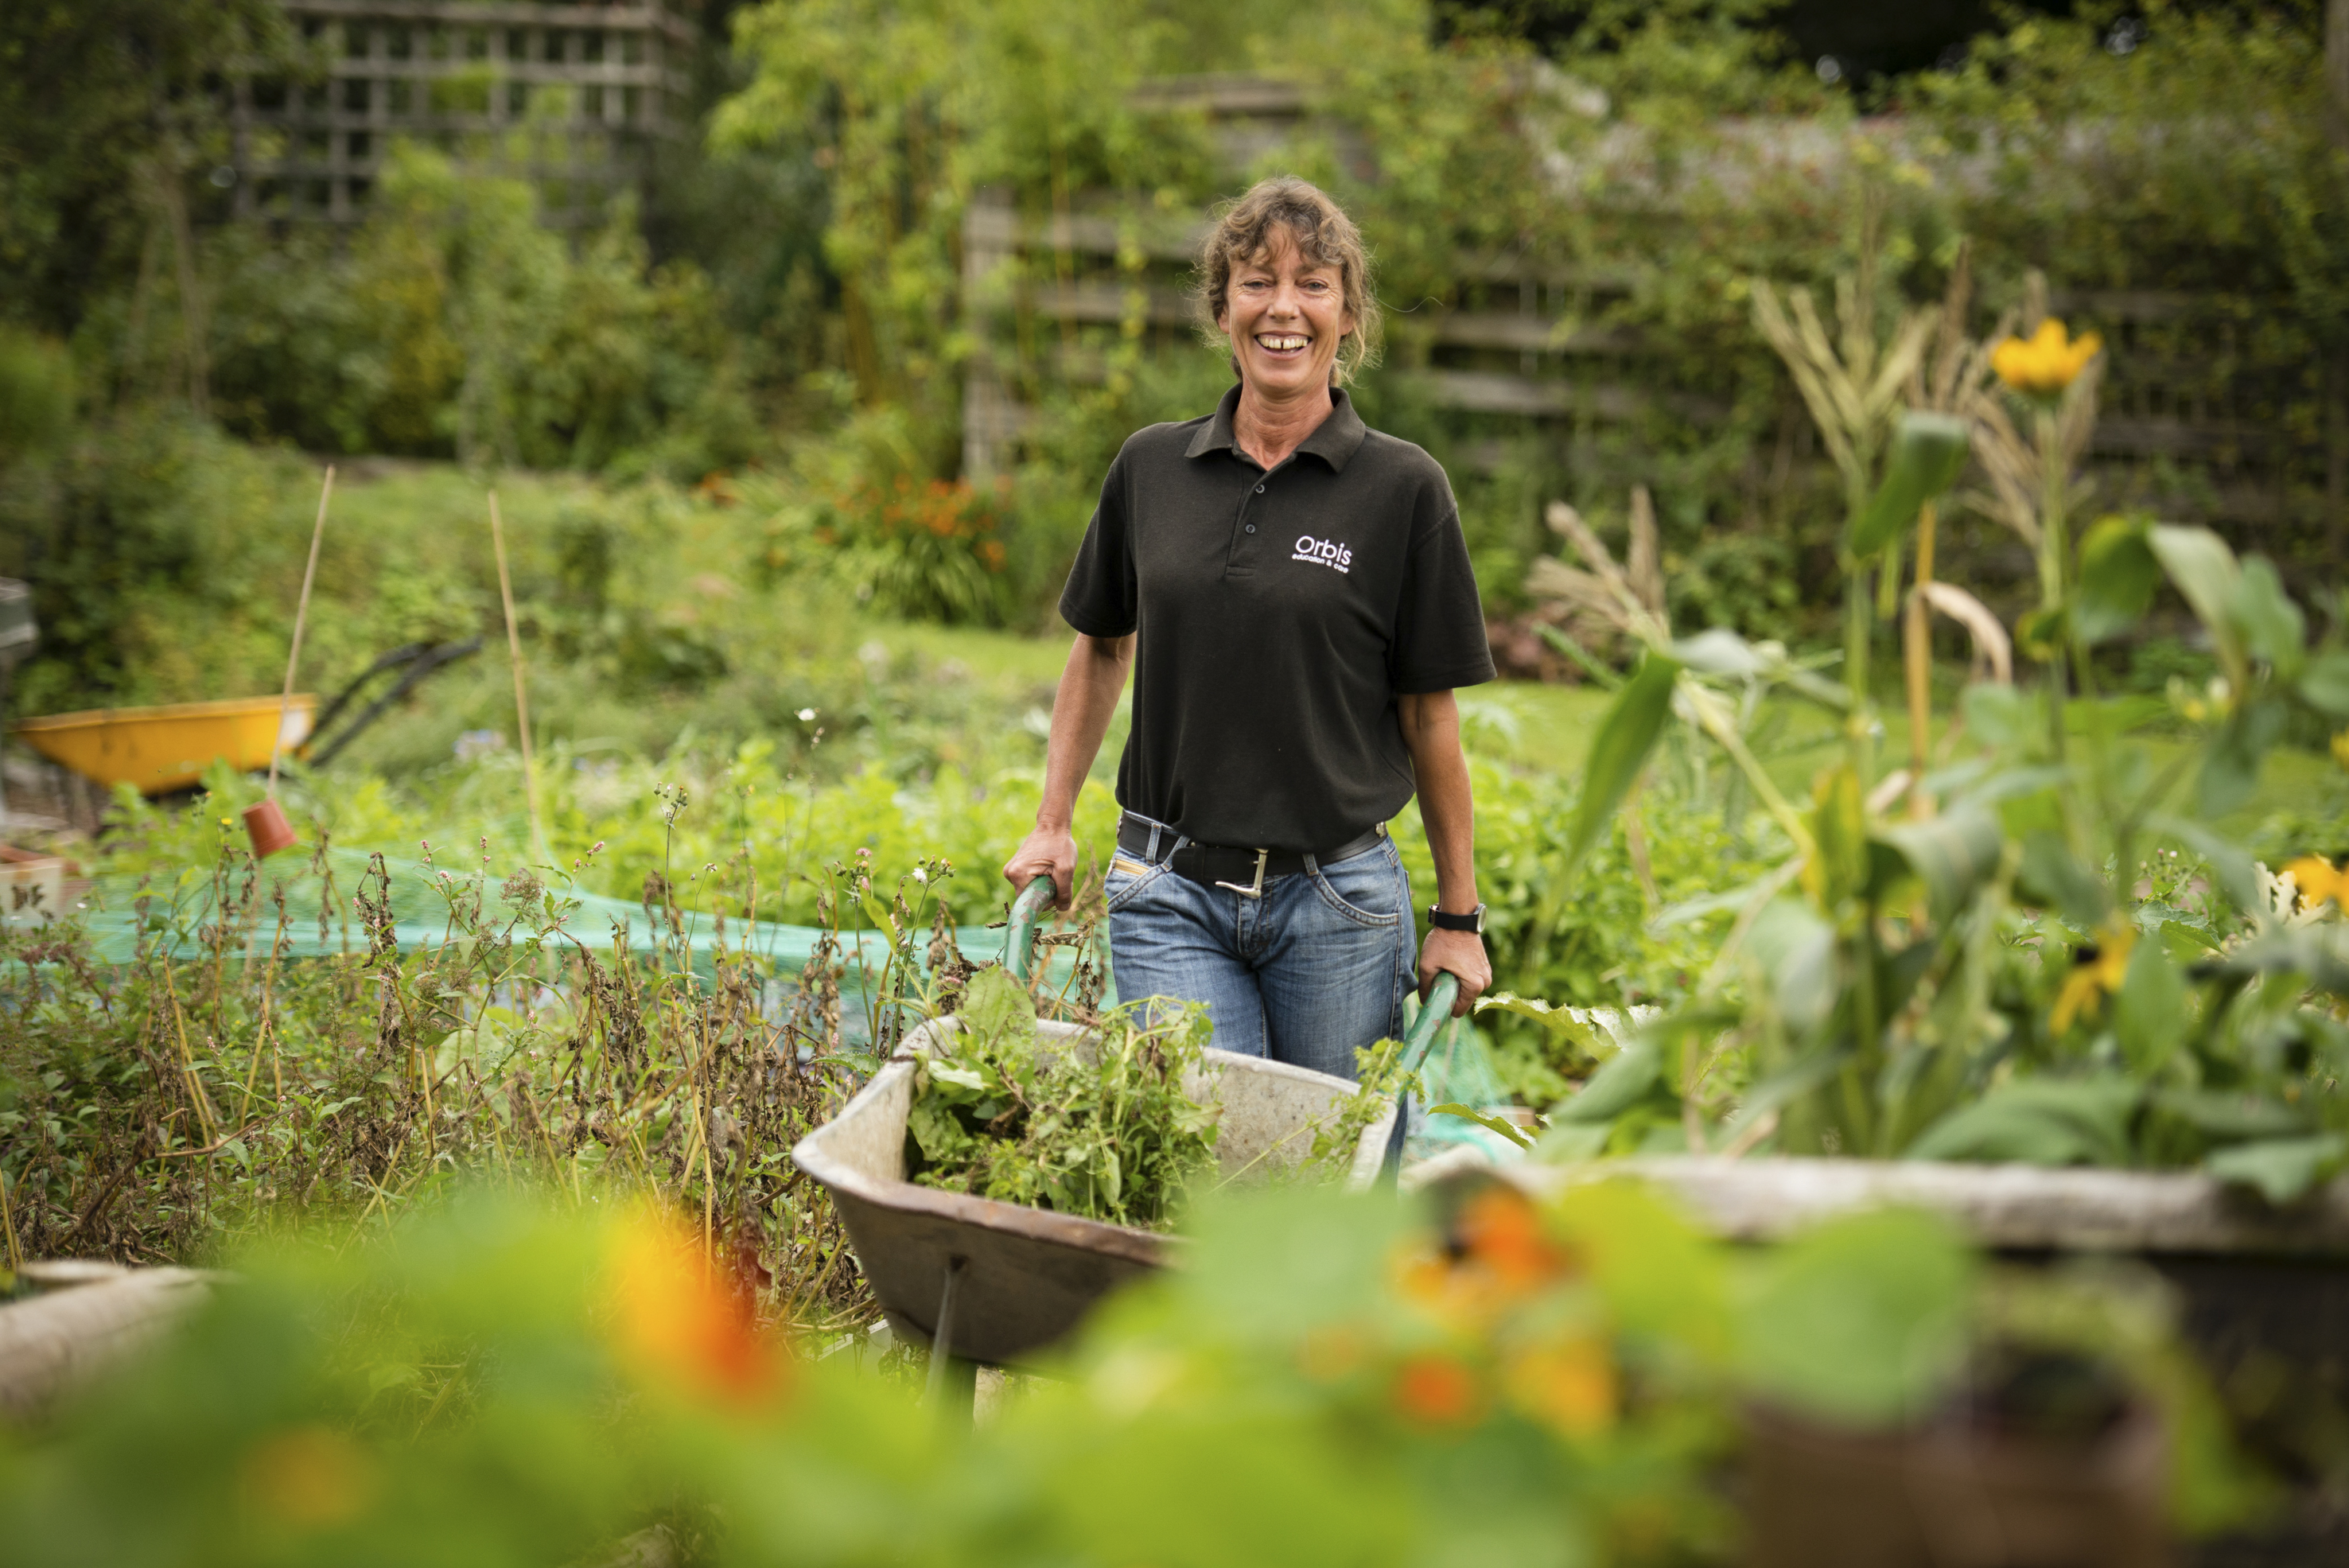 Green-fingered Lesley in running for top care award